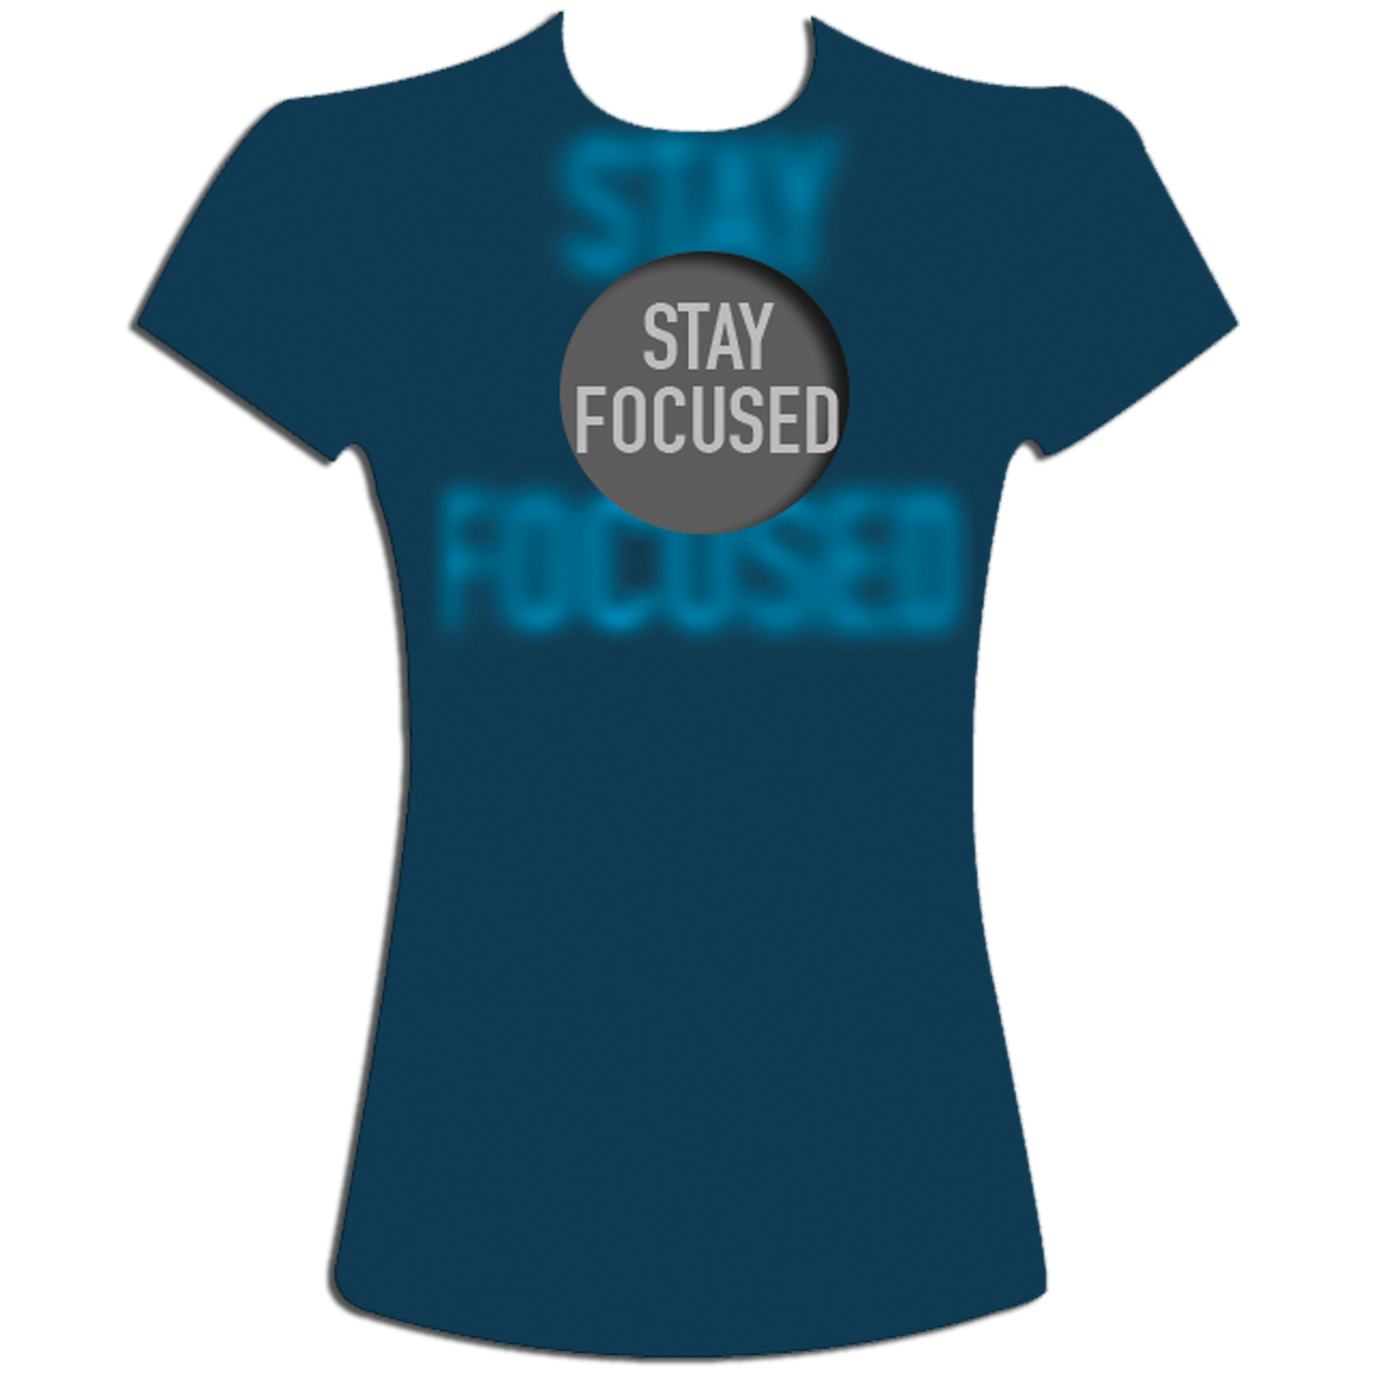 Stay Focused t-shirt